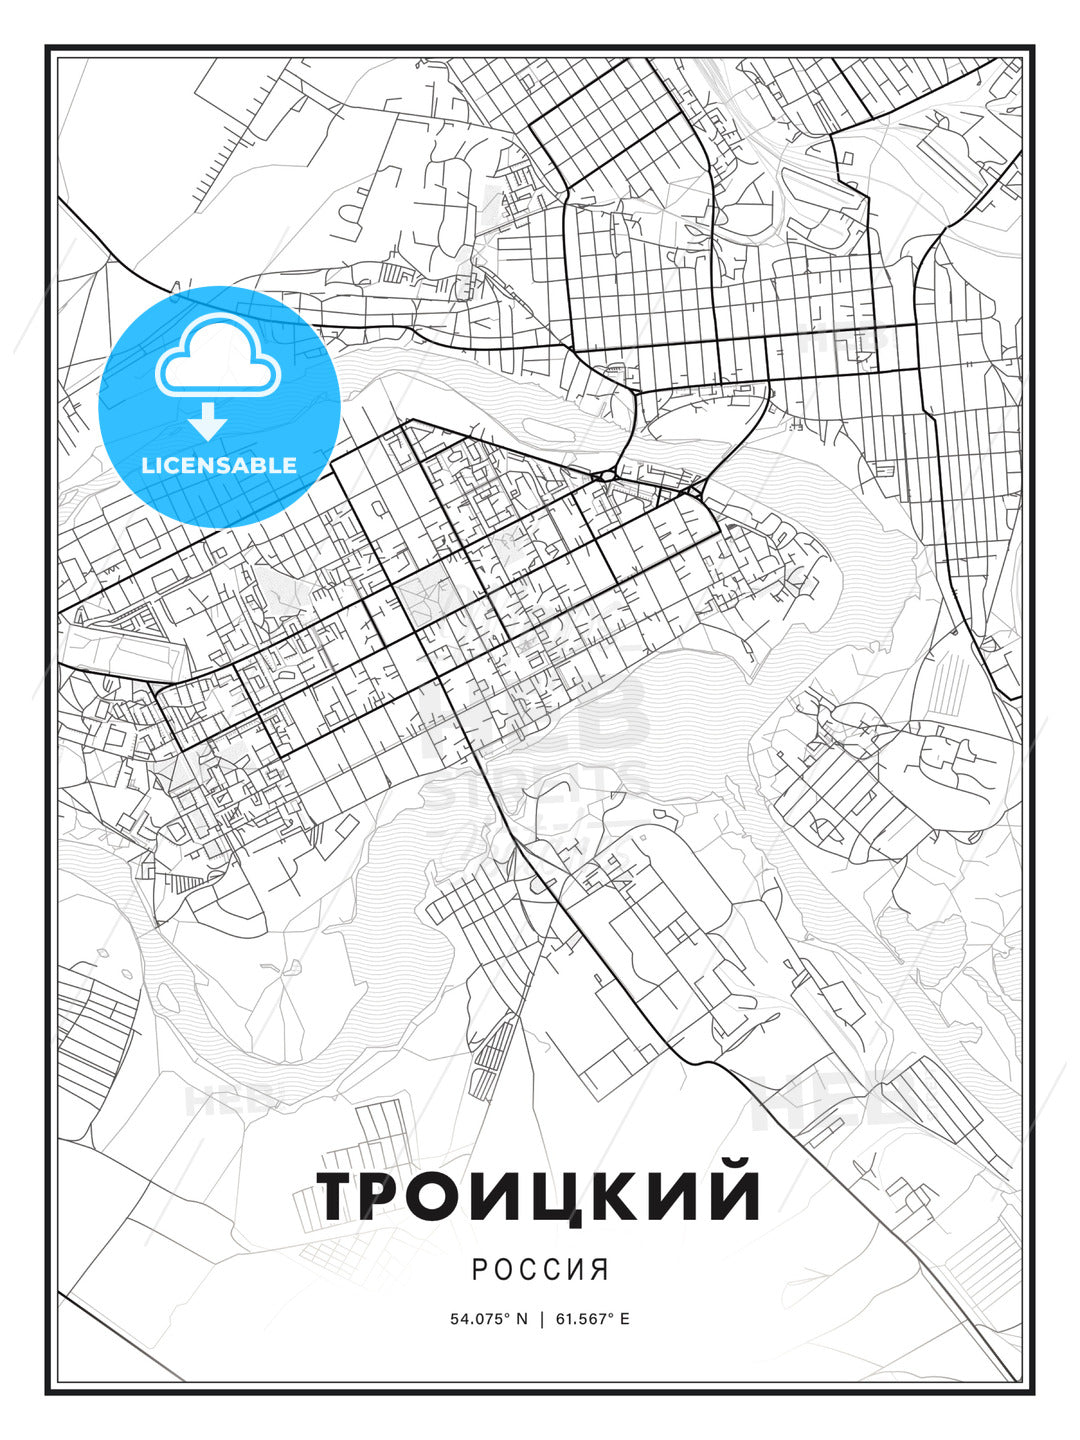 ТРОИЦКИЙ / Troitsk, Russia, Modern Print Template in Various Formats - HEBSTREITS Sketches